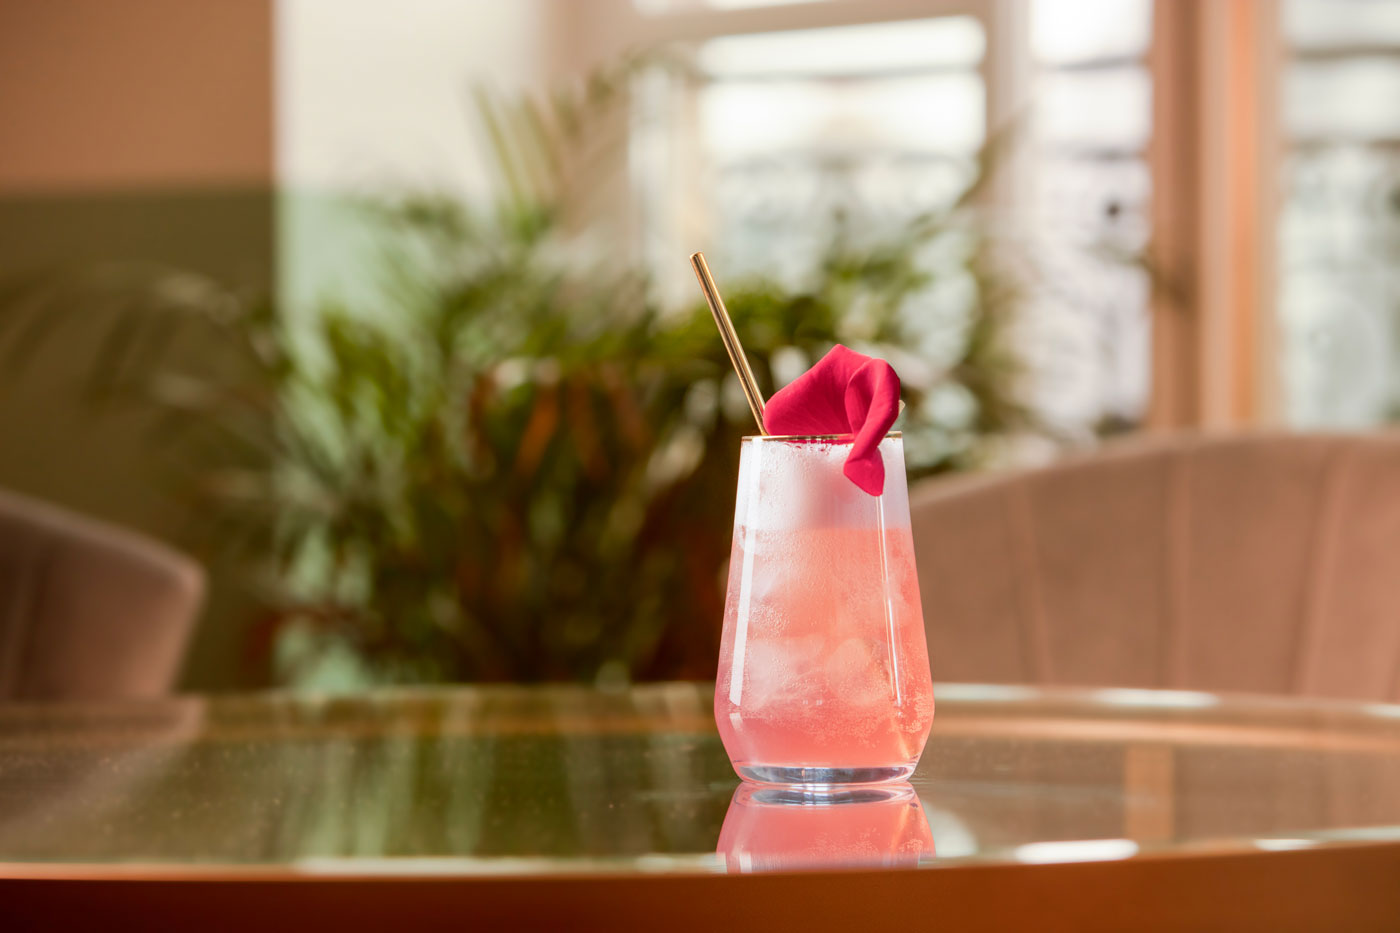 A tall glass filled with a pink drink and topped with a rose petal sits on a coffee table.